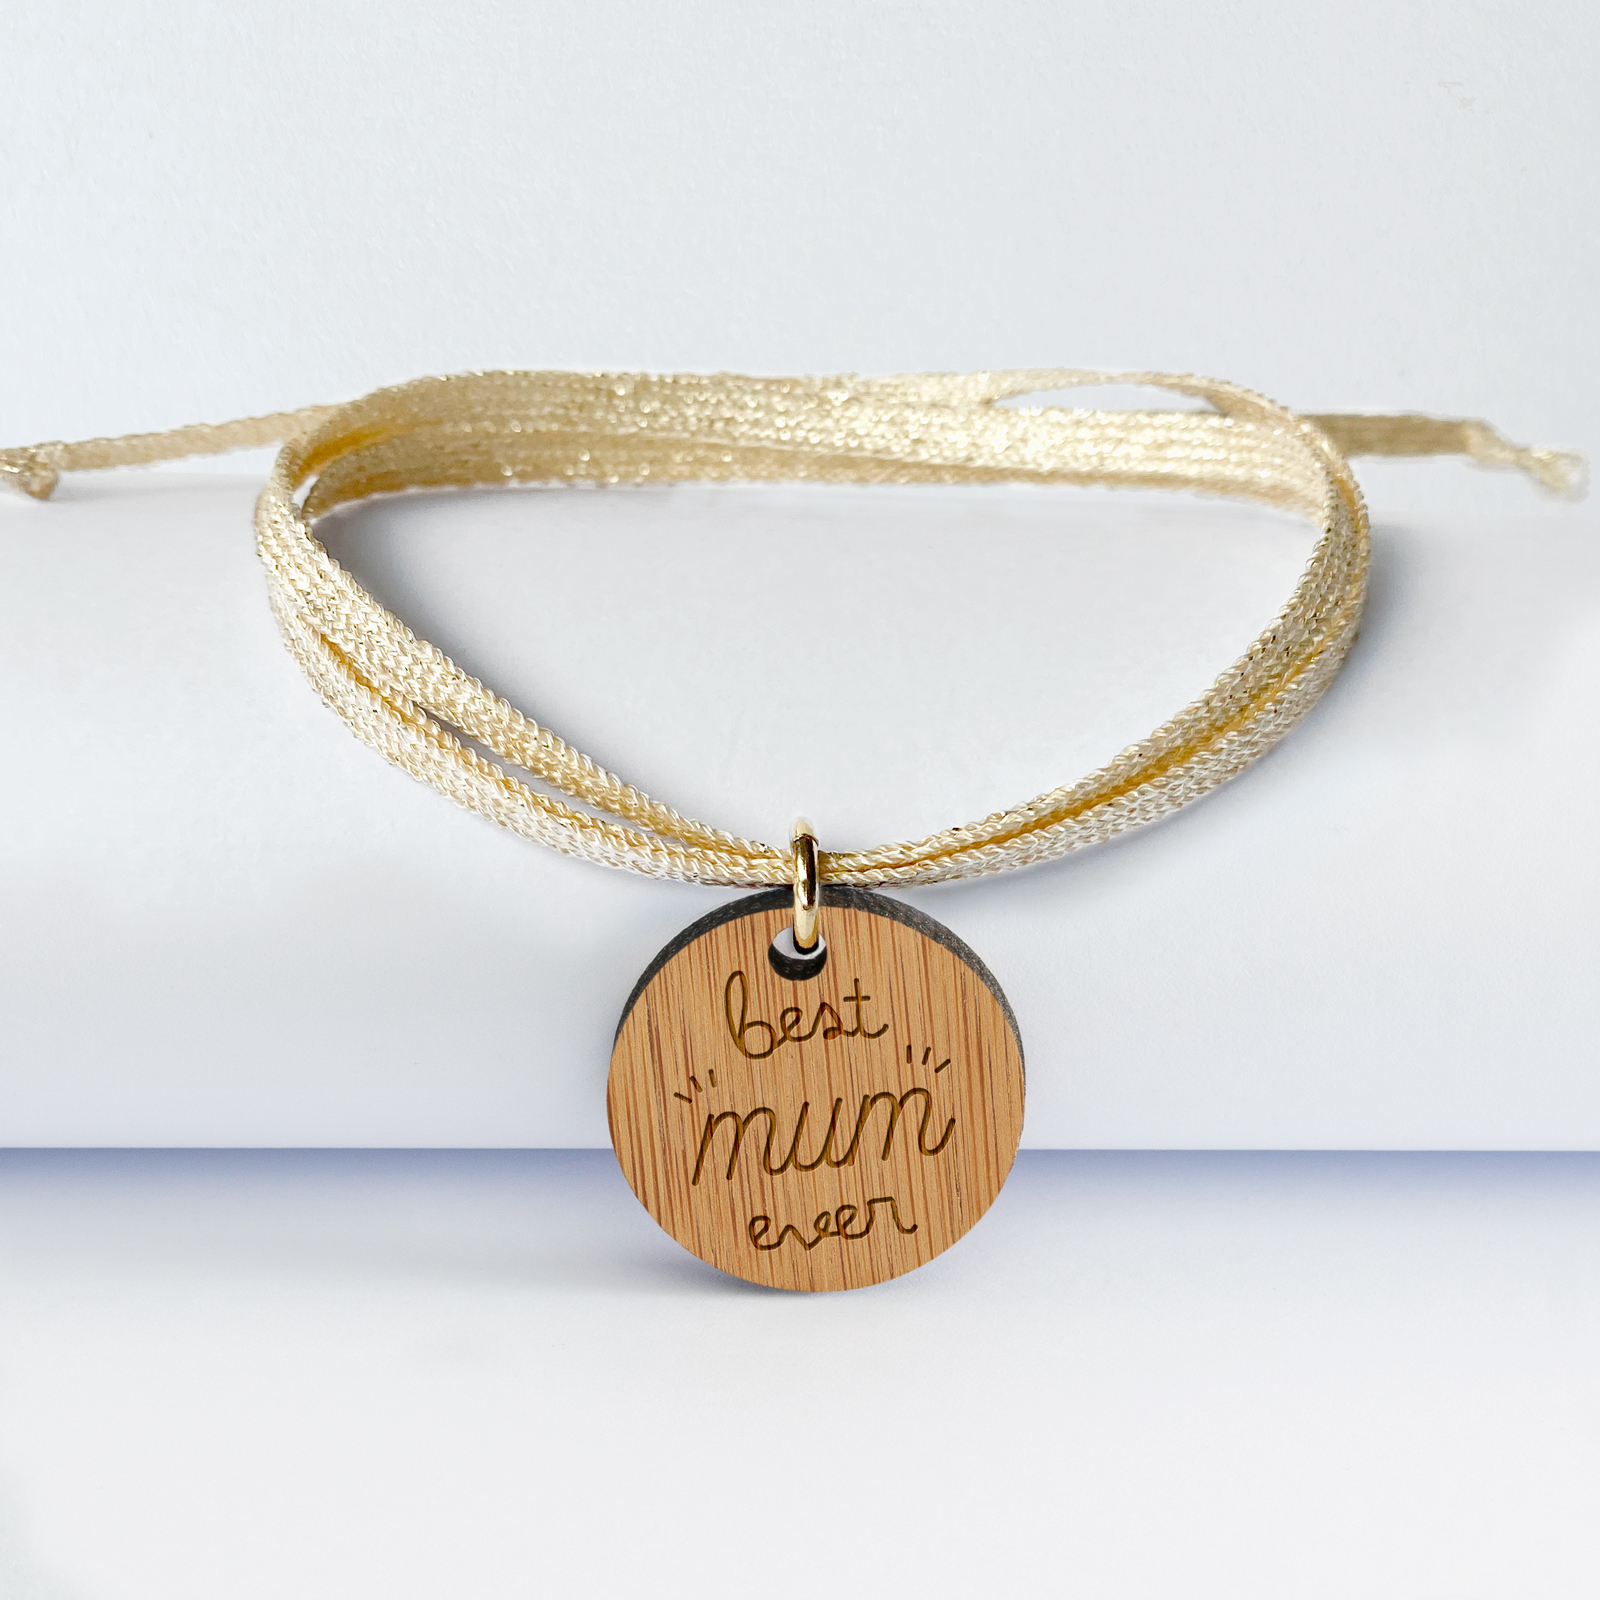 Personalised 3 turn bracelet engraved medal with round sleeper wood 20 mm - special edition "Best mum ever"